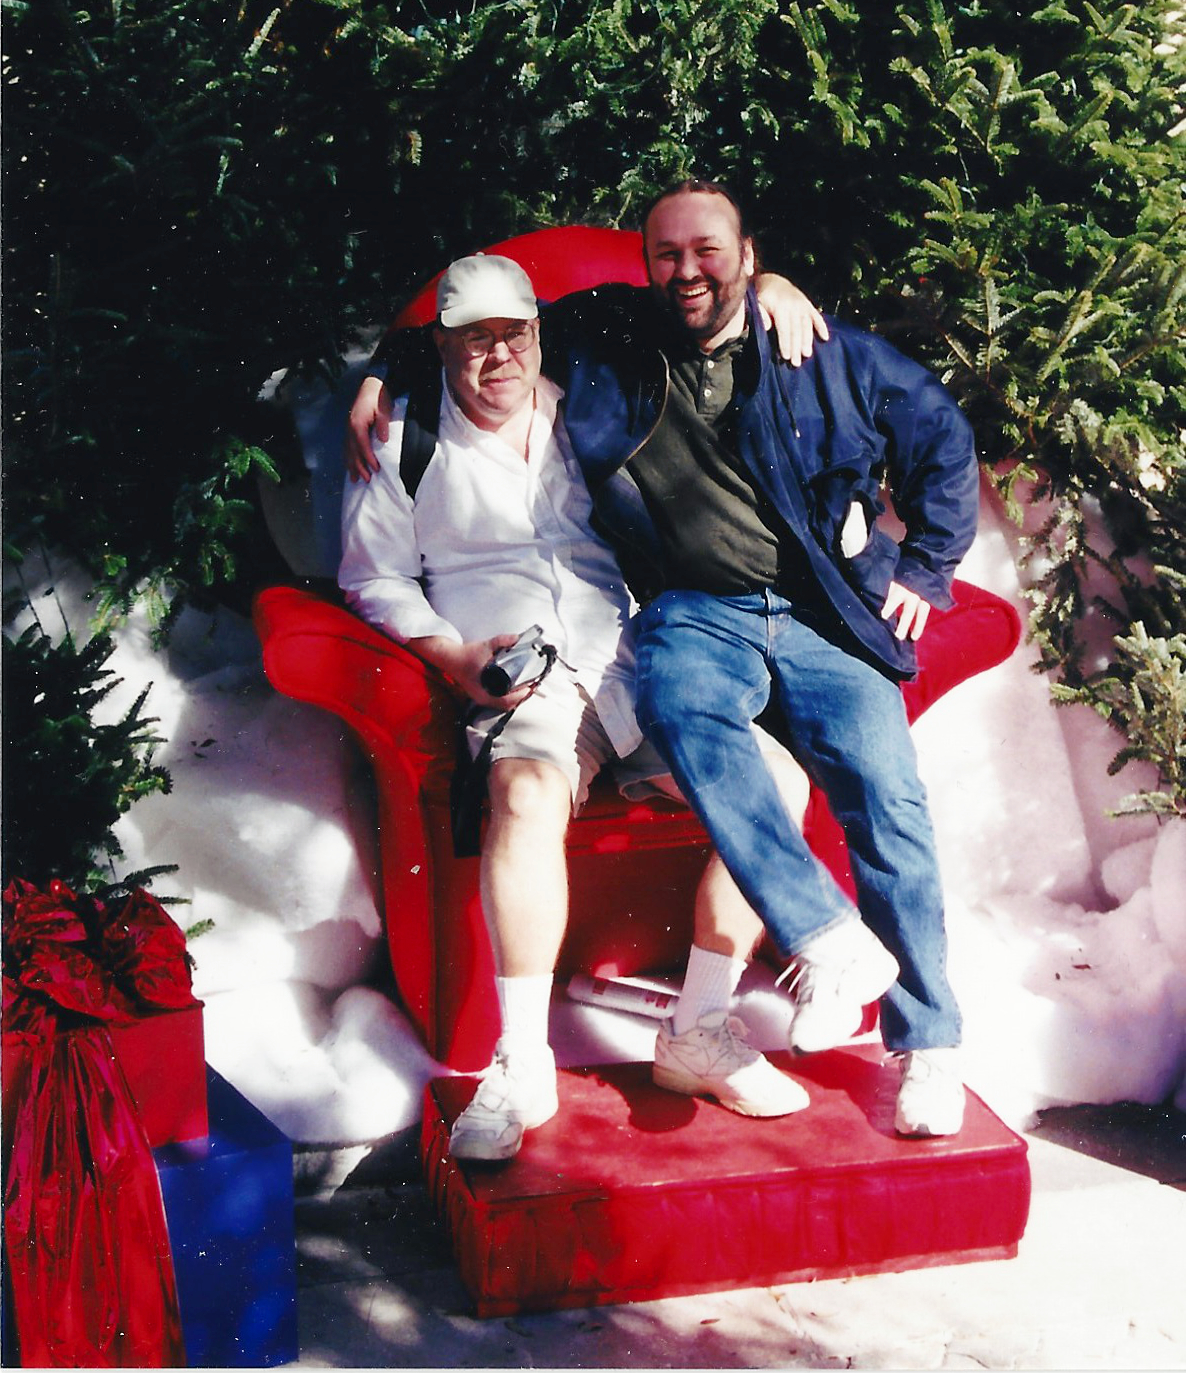 Rod and Grady in Santas chair